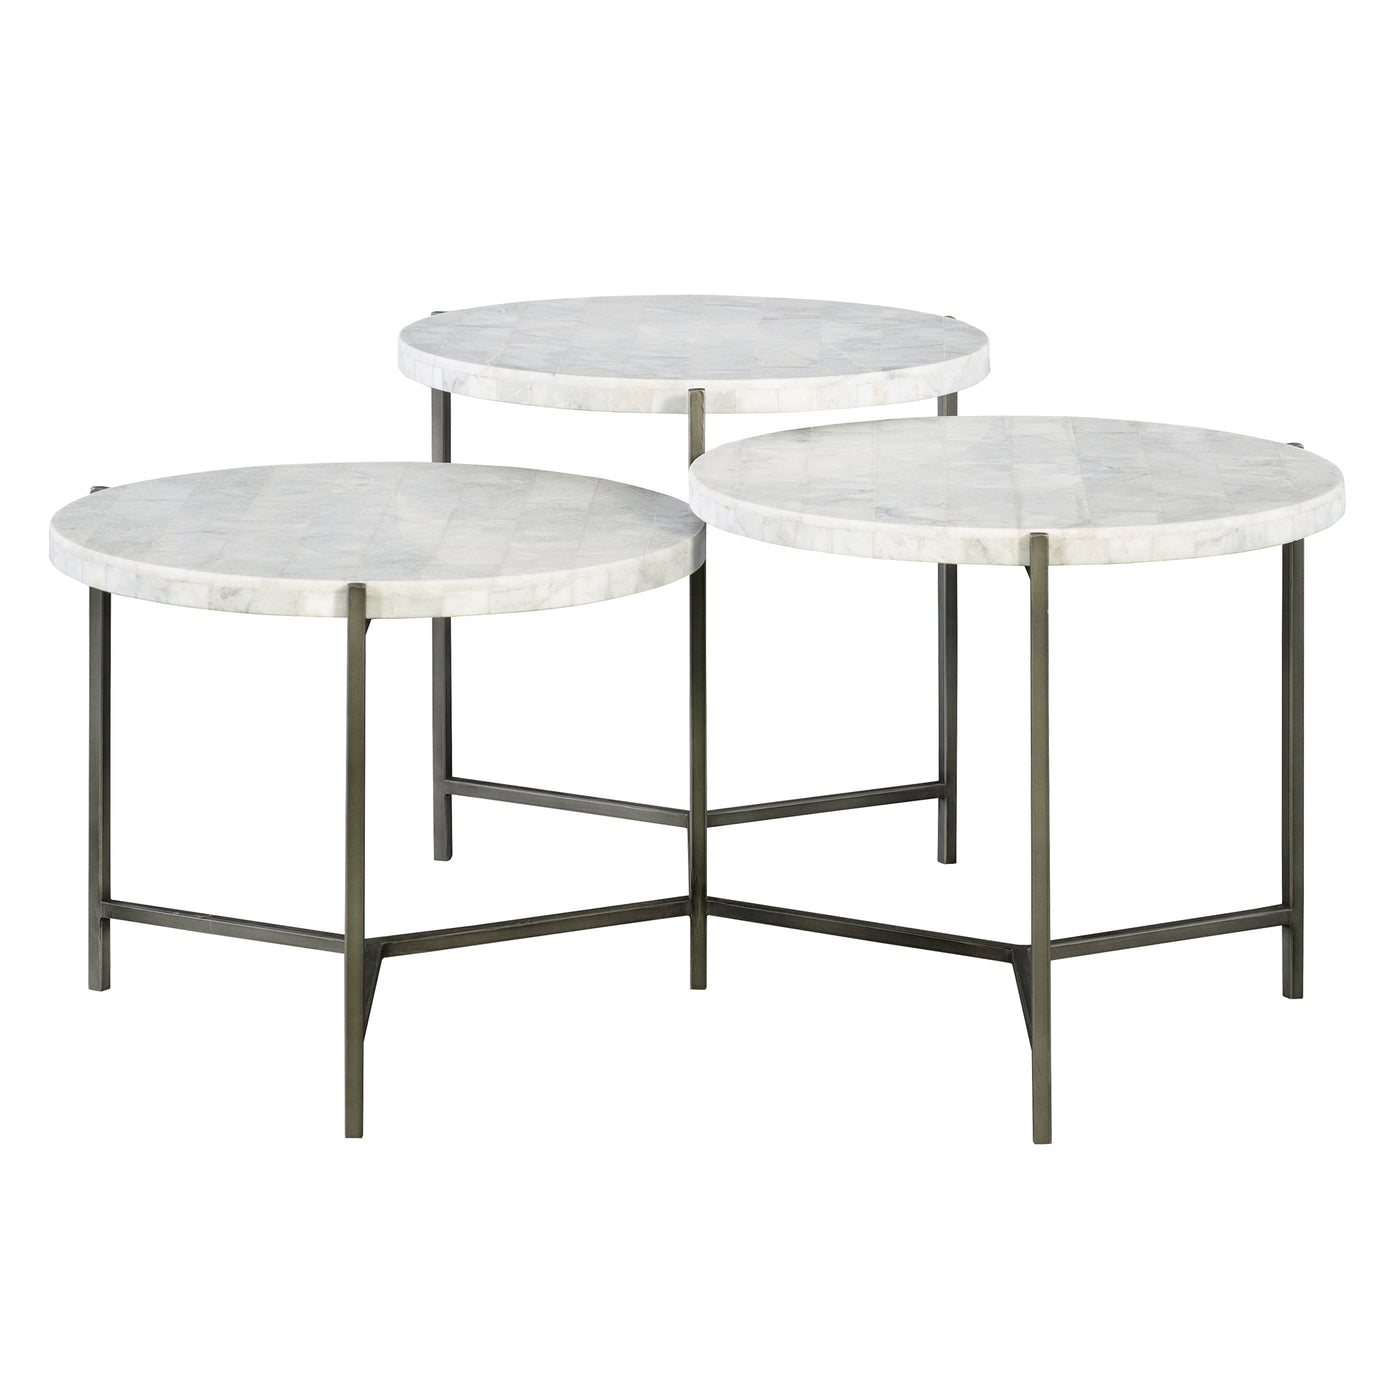 Clean Contemporary Styling Is Featured In This Tiered Coffee Table Design With White Marble Tops, On A Forged Iron Base In...